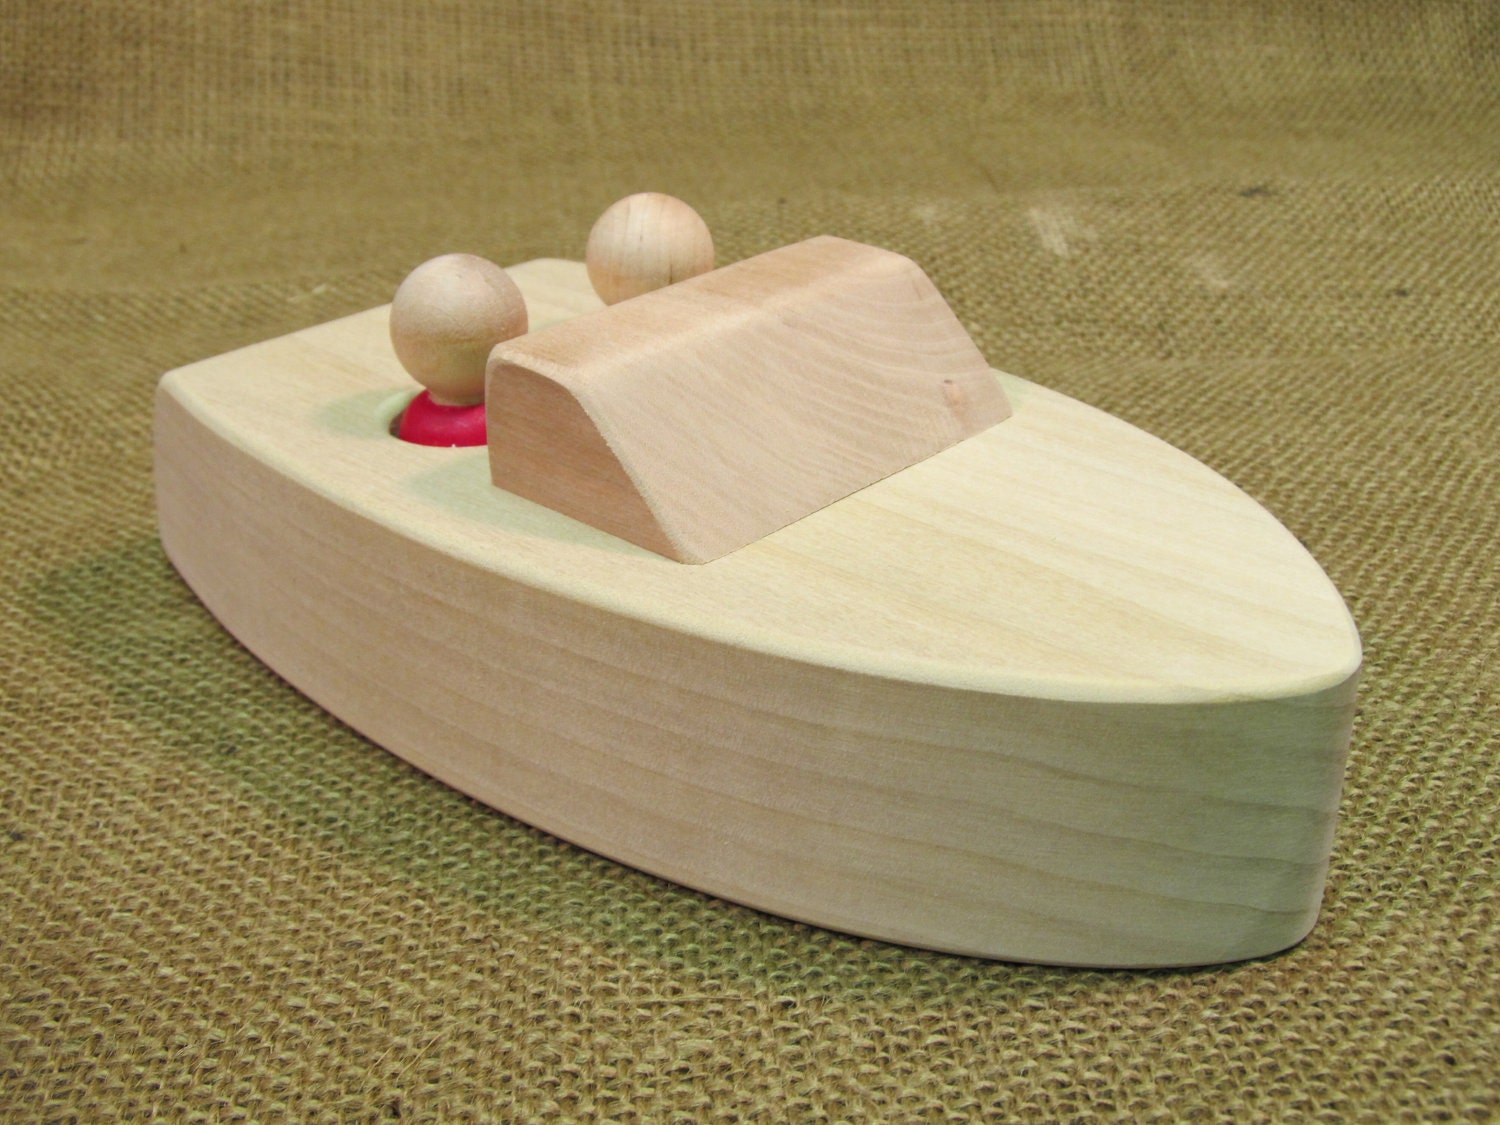 This is Toy wood paddle boat plans | boat plans